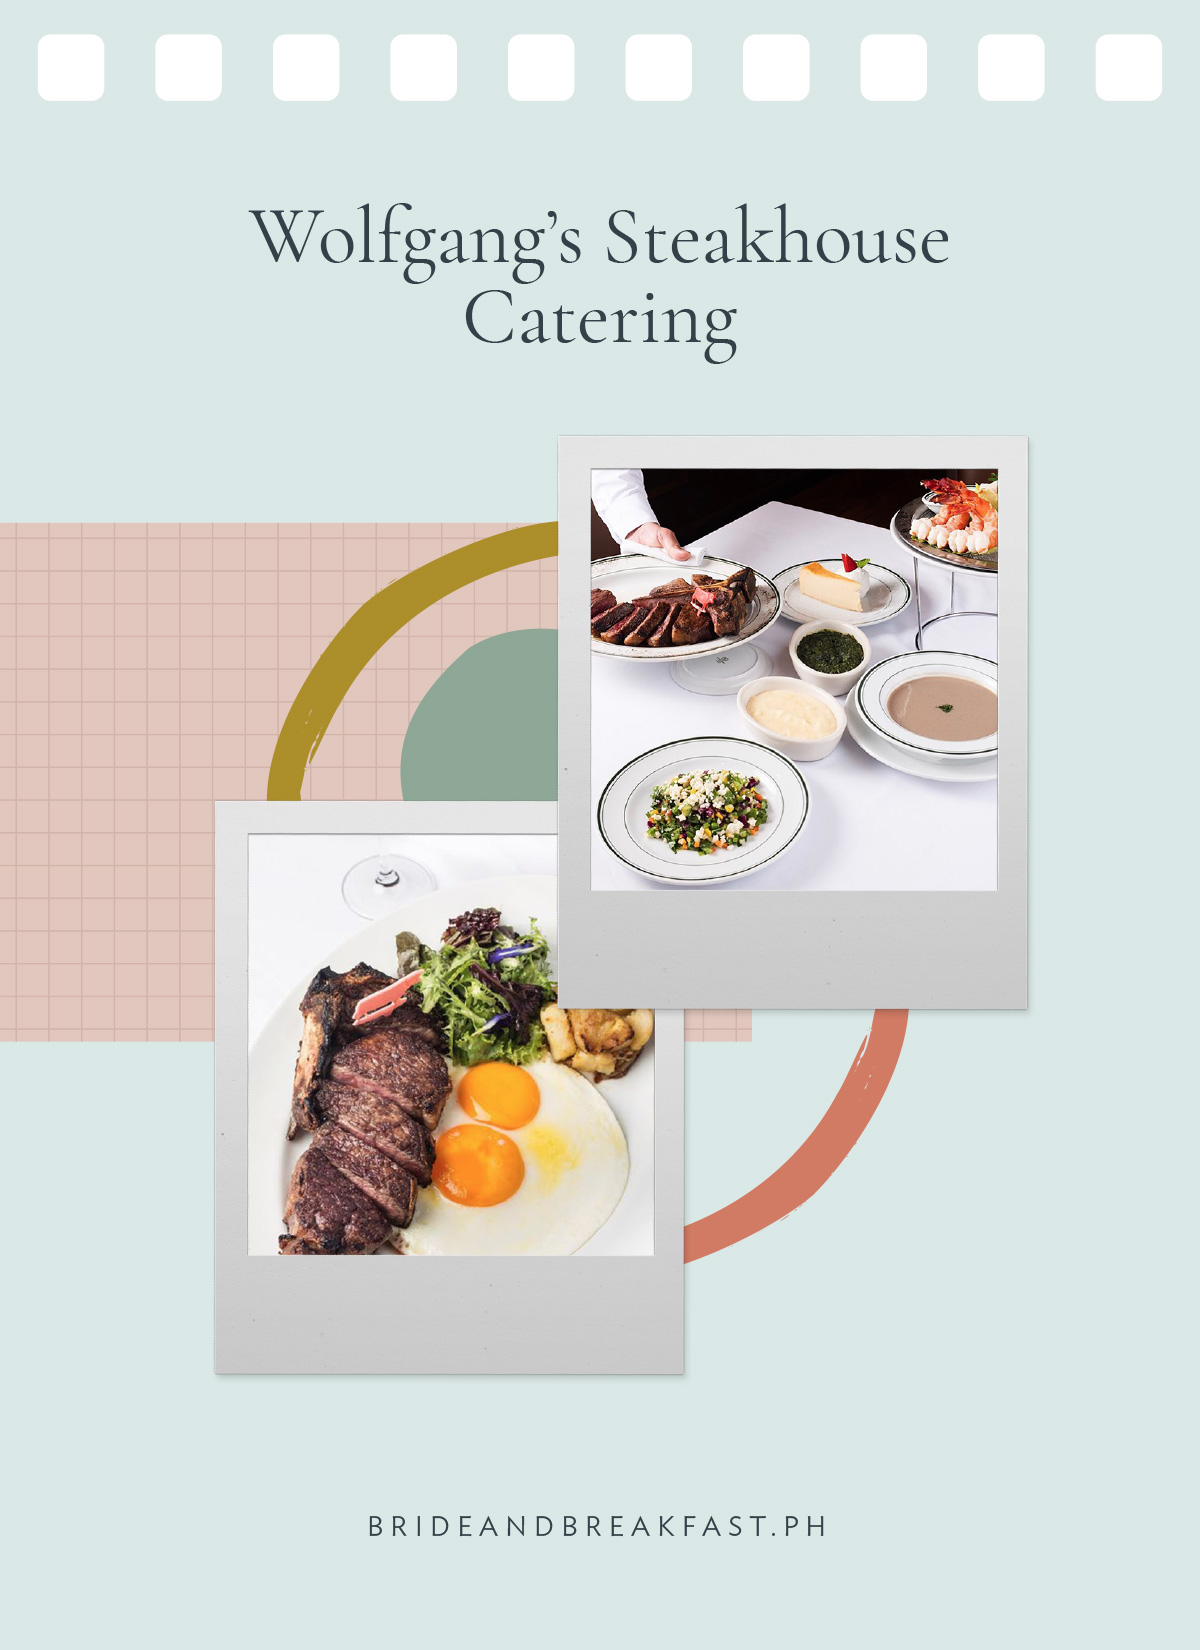 Wolfgang's Steakhouse Catering